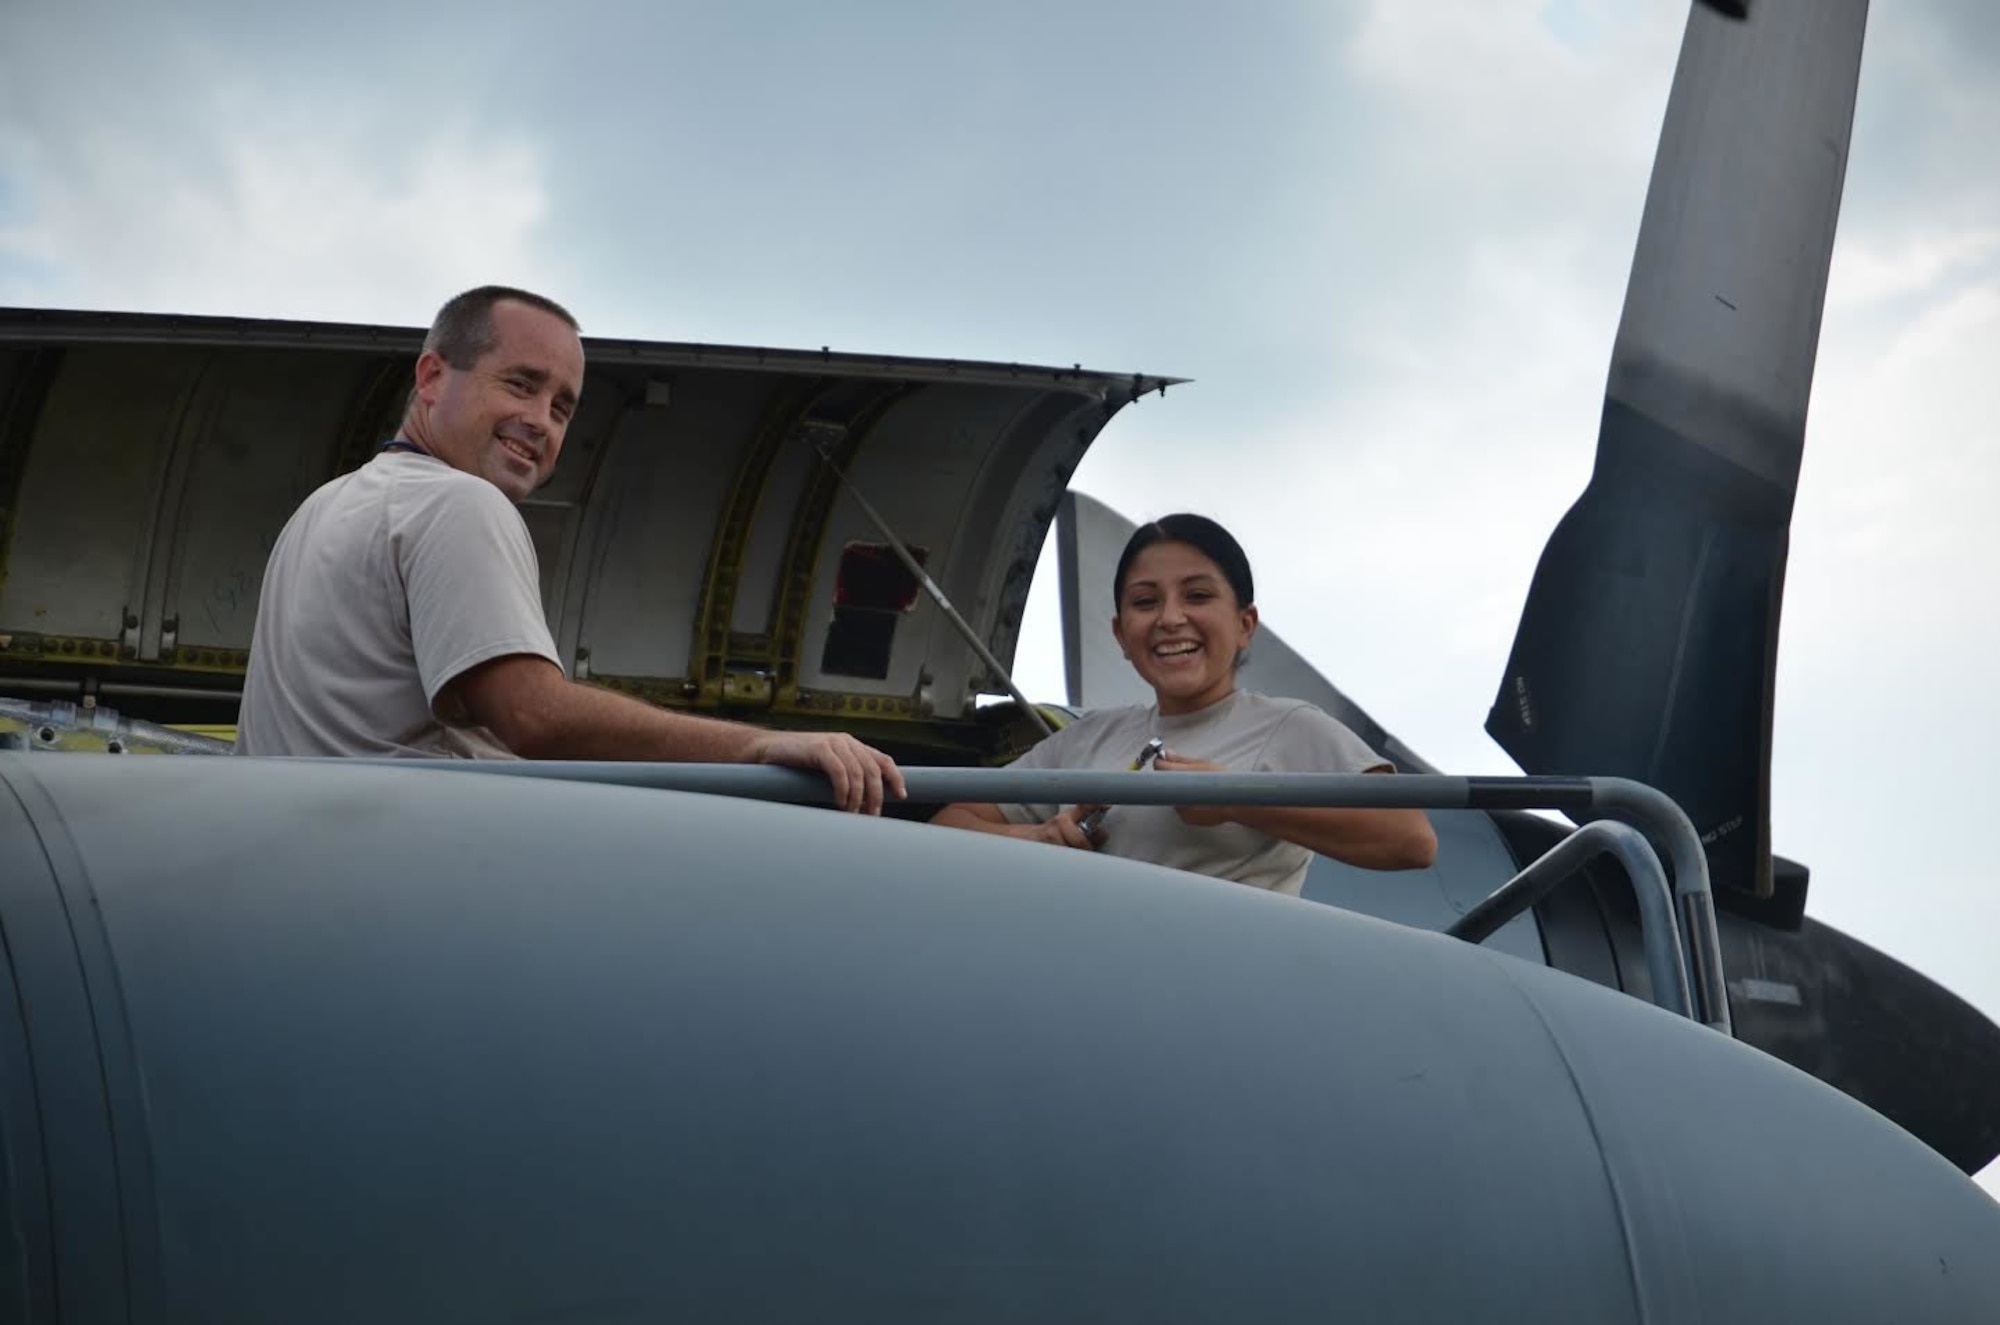 Airman 1st Class Cindy Esquero, 94th Maintenance Squadron avionics guidance and controls, replaces a tachometer generator under the guidance of Technical Sgt. John Halliday, 94th MXS at Dobbins Air Reserve Base on September 27, 2016. Esquero is on seasonal orders to learn to maintain the various parts of the C-130. (U.S. Air Force photo by Senior Airman Lauren Douglas) 